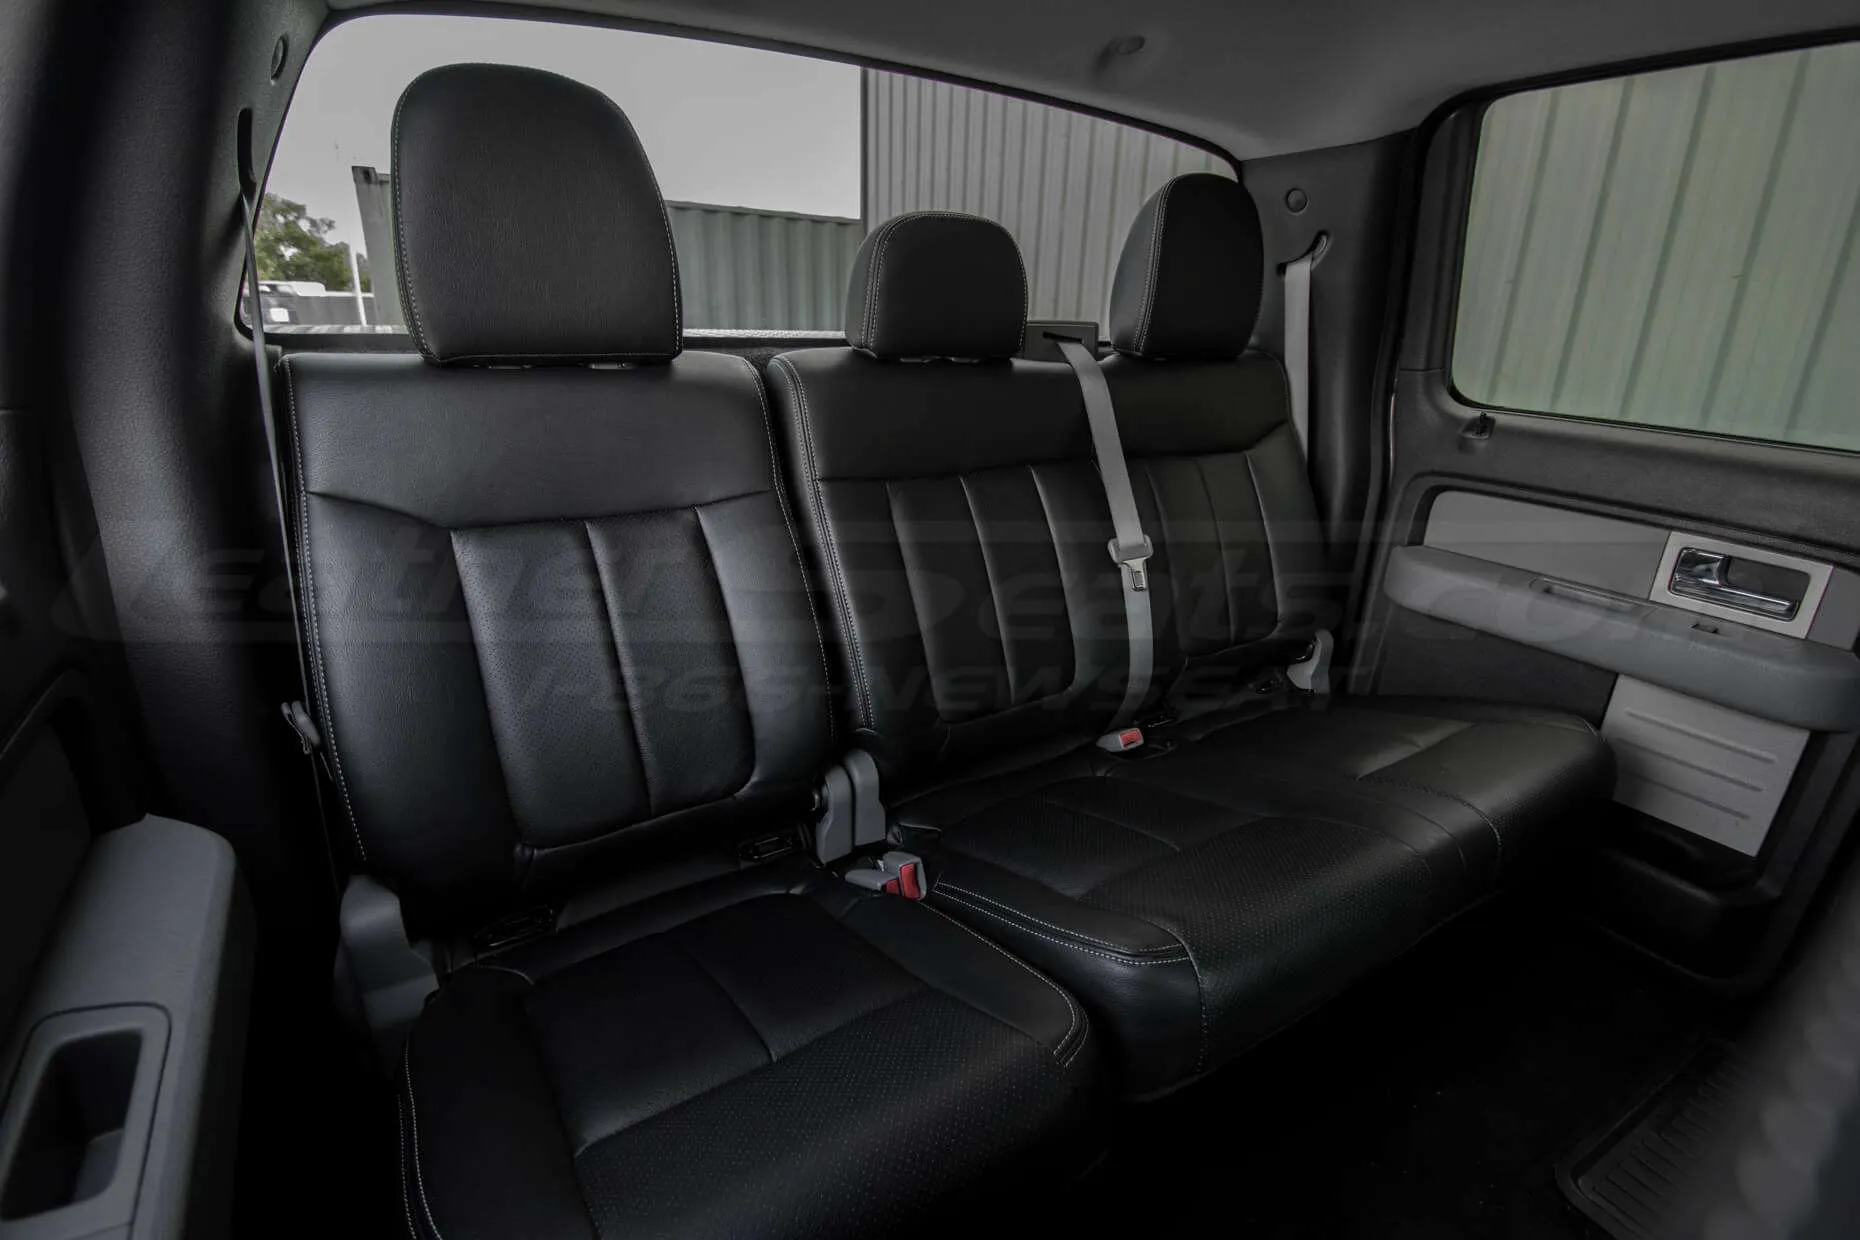 Ford F-150 Upholstery Kit - Black - Installed - Rear seats